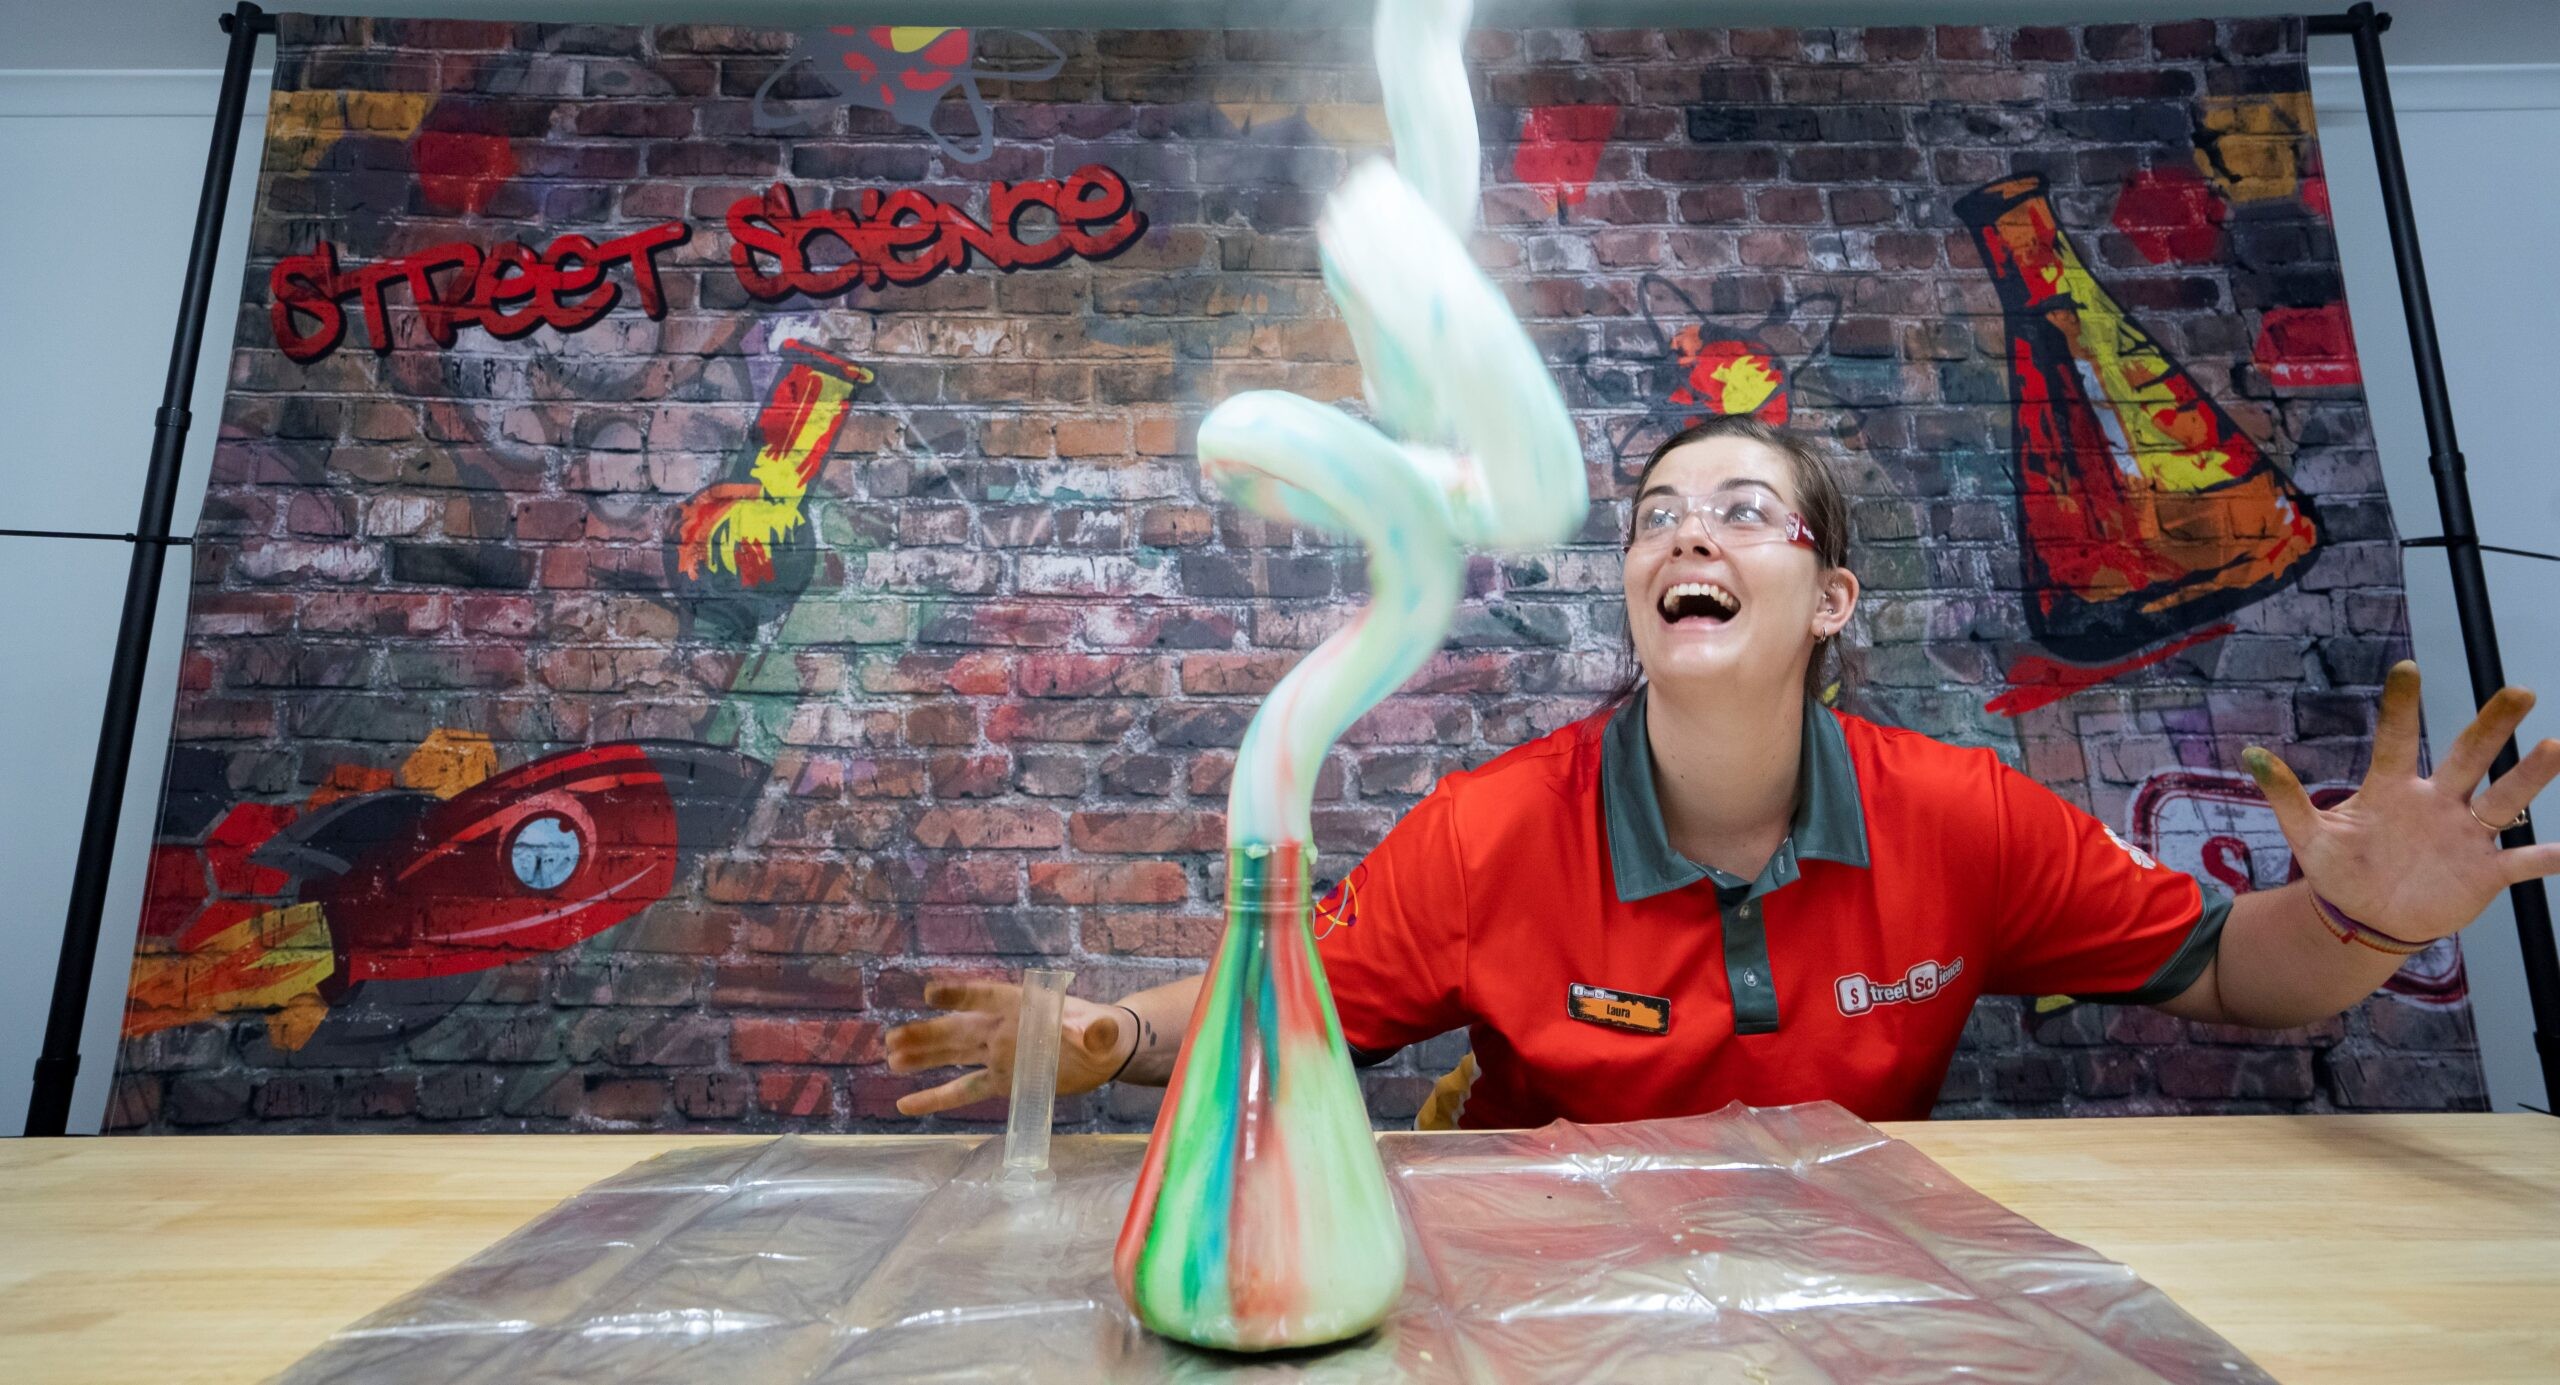 Scientist with elephant toothpaste foam squirting out of a glass beaker | Street Science